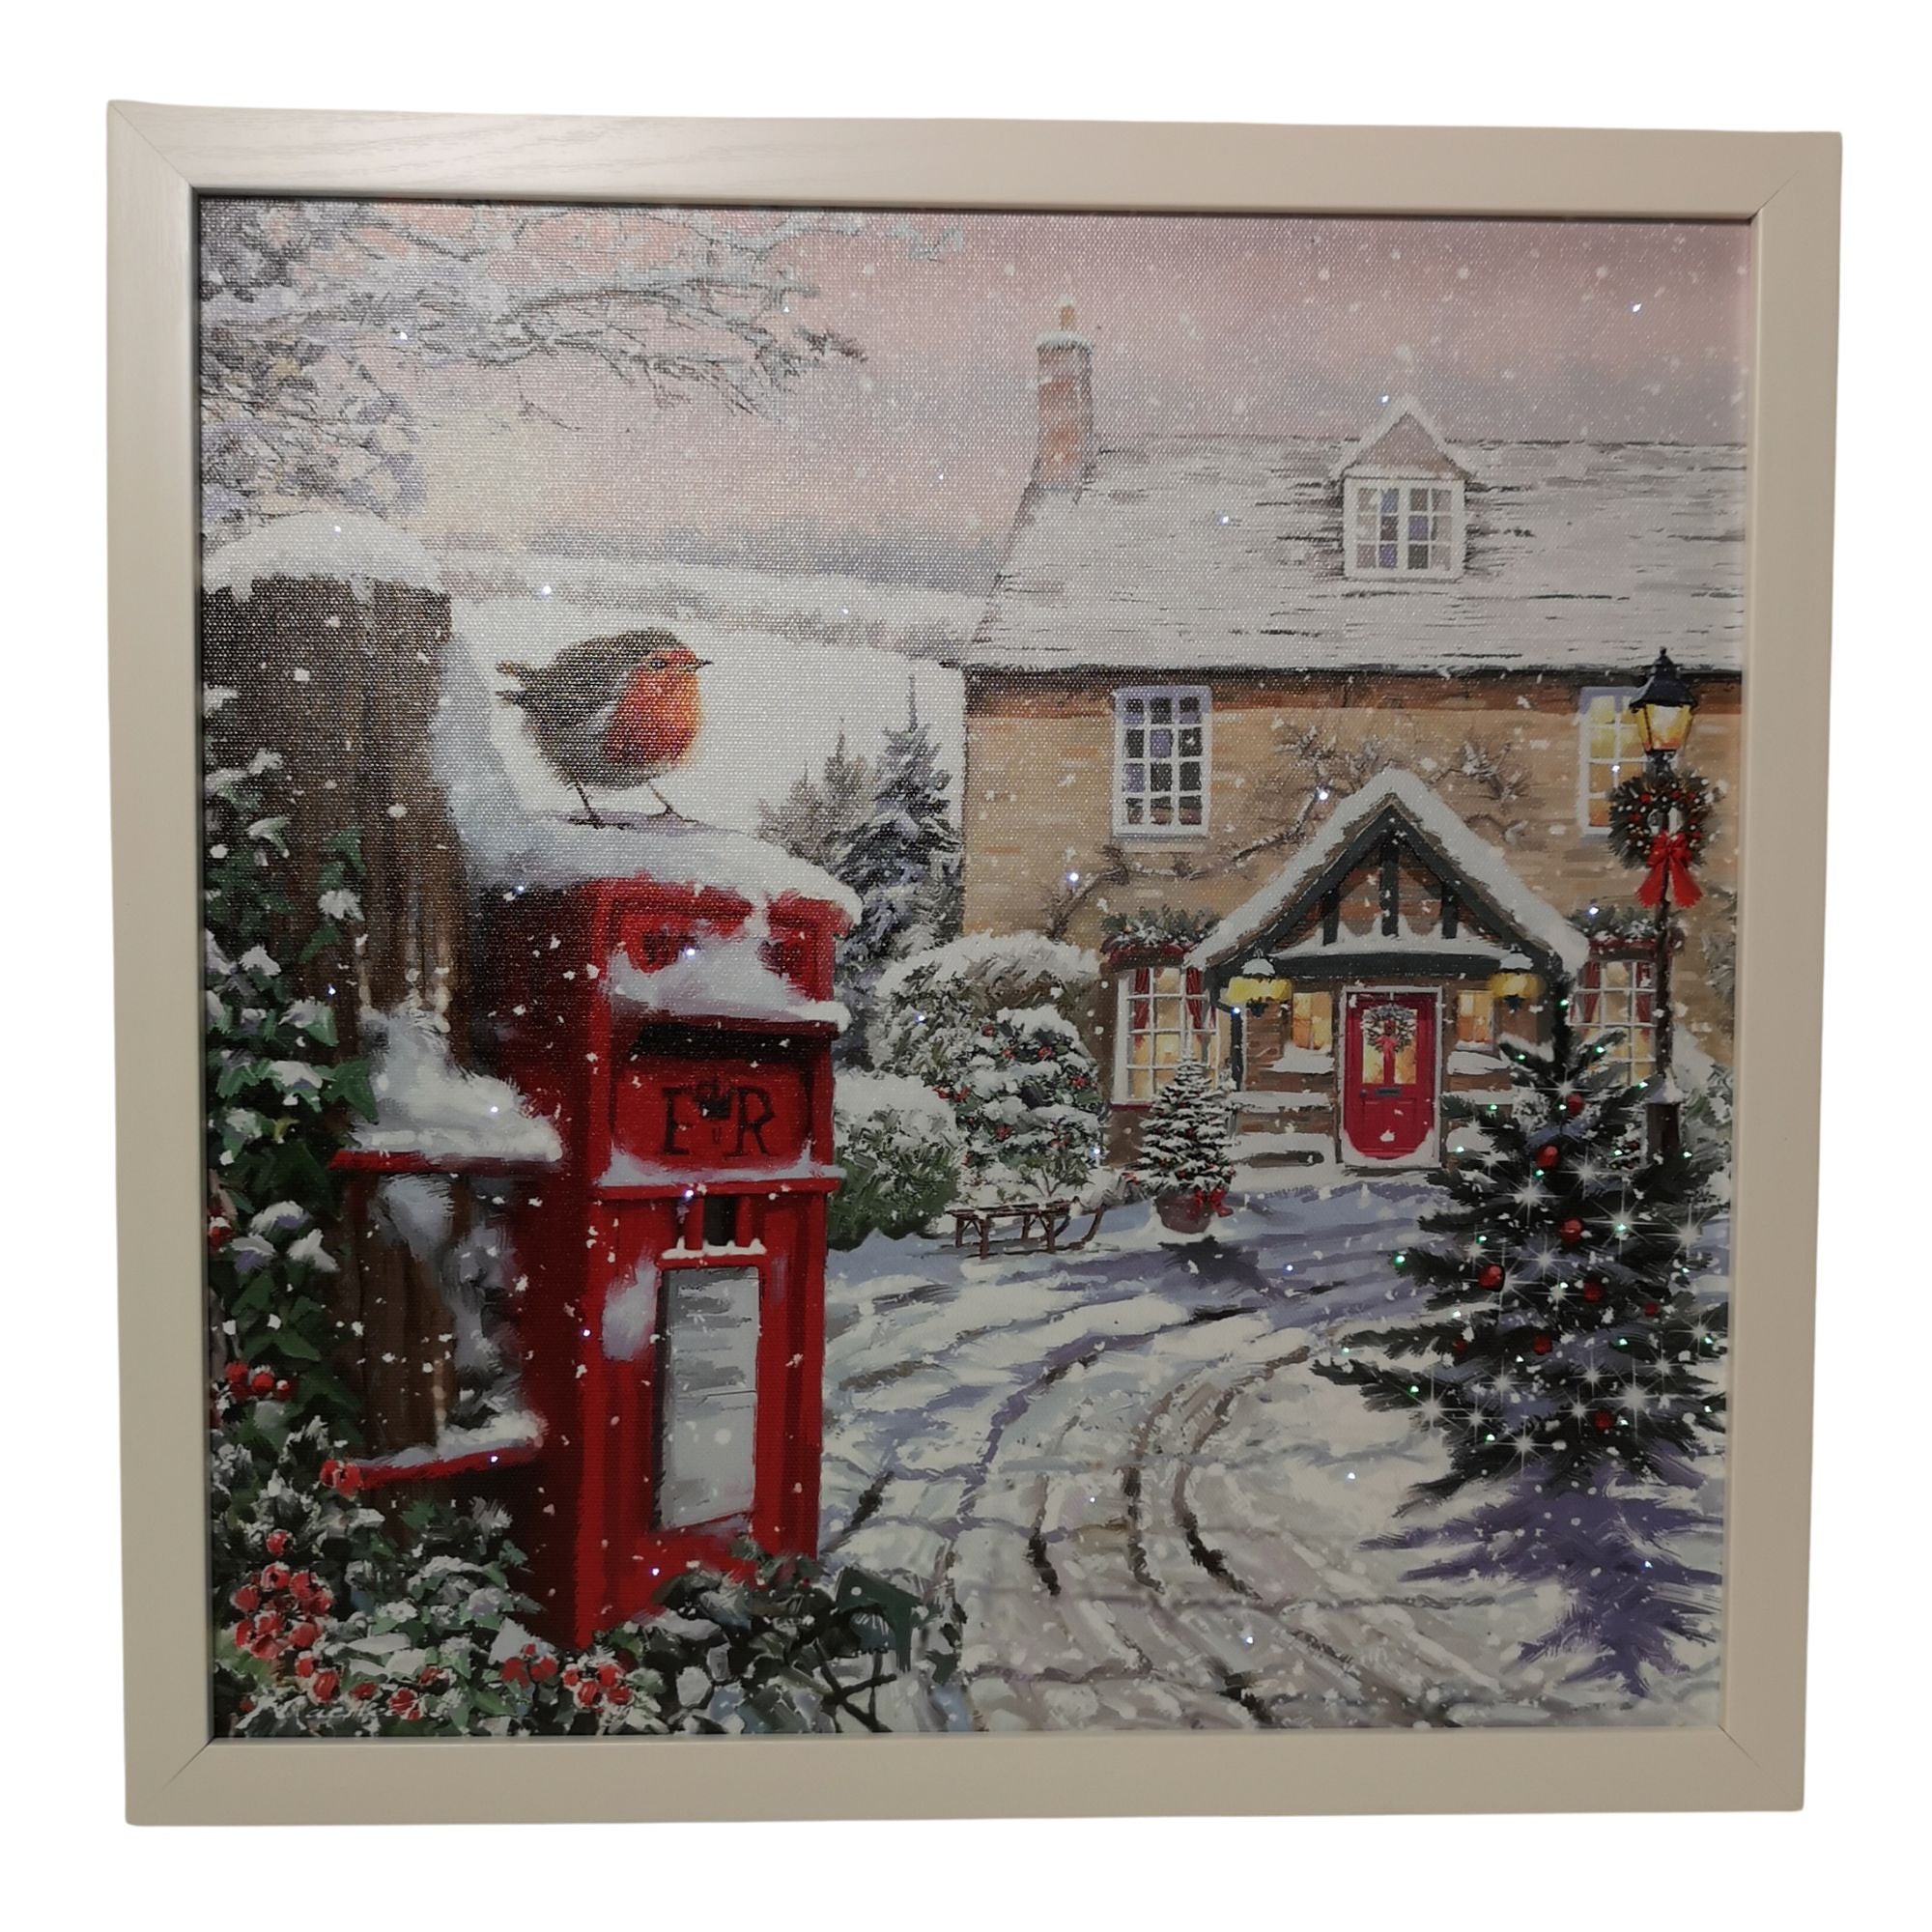 Battery Operated 40 x 40cm Light up Snowy Christmas Robin Scene Picture Canvas